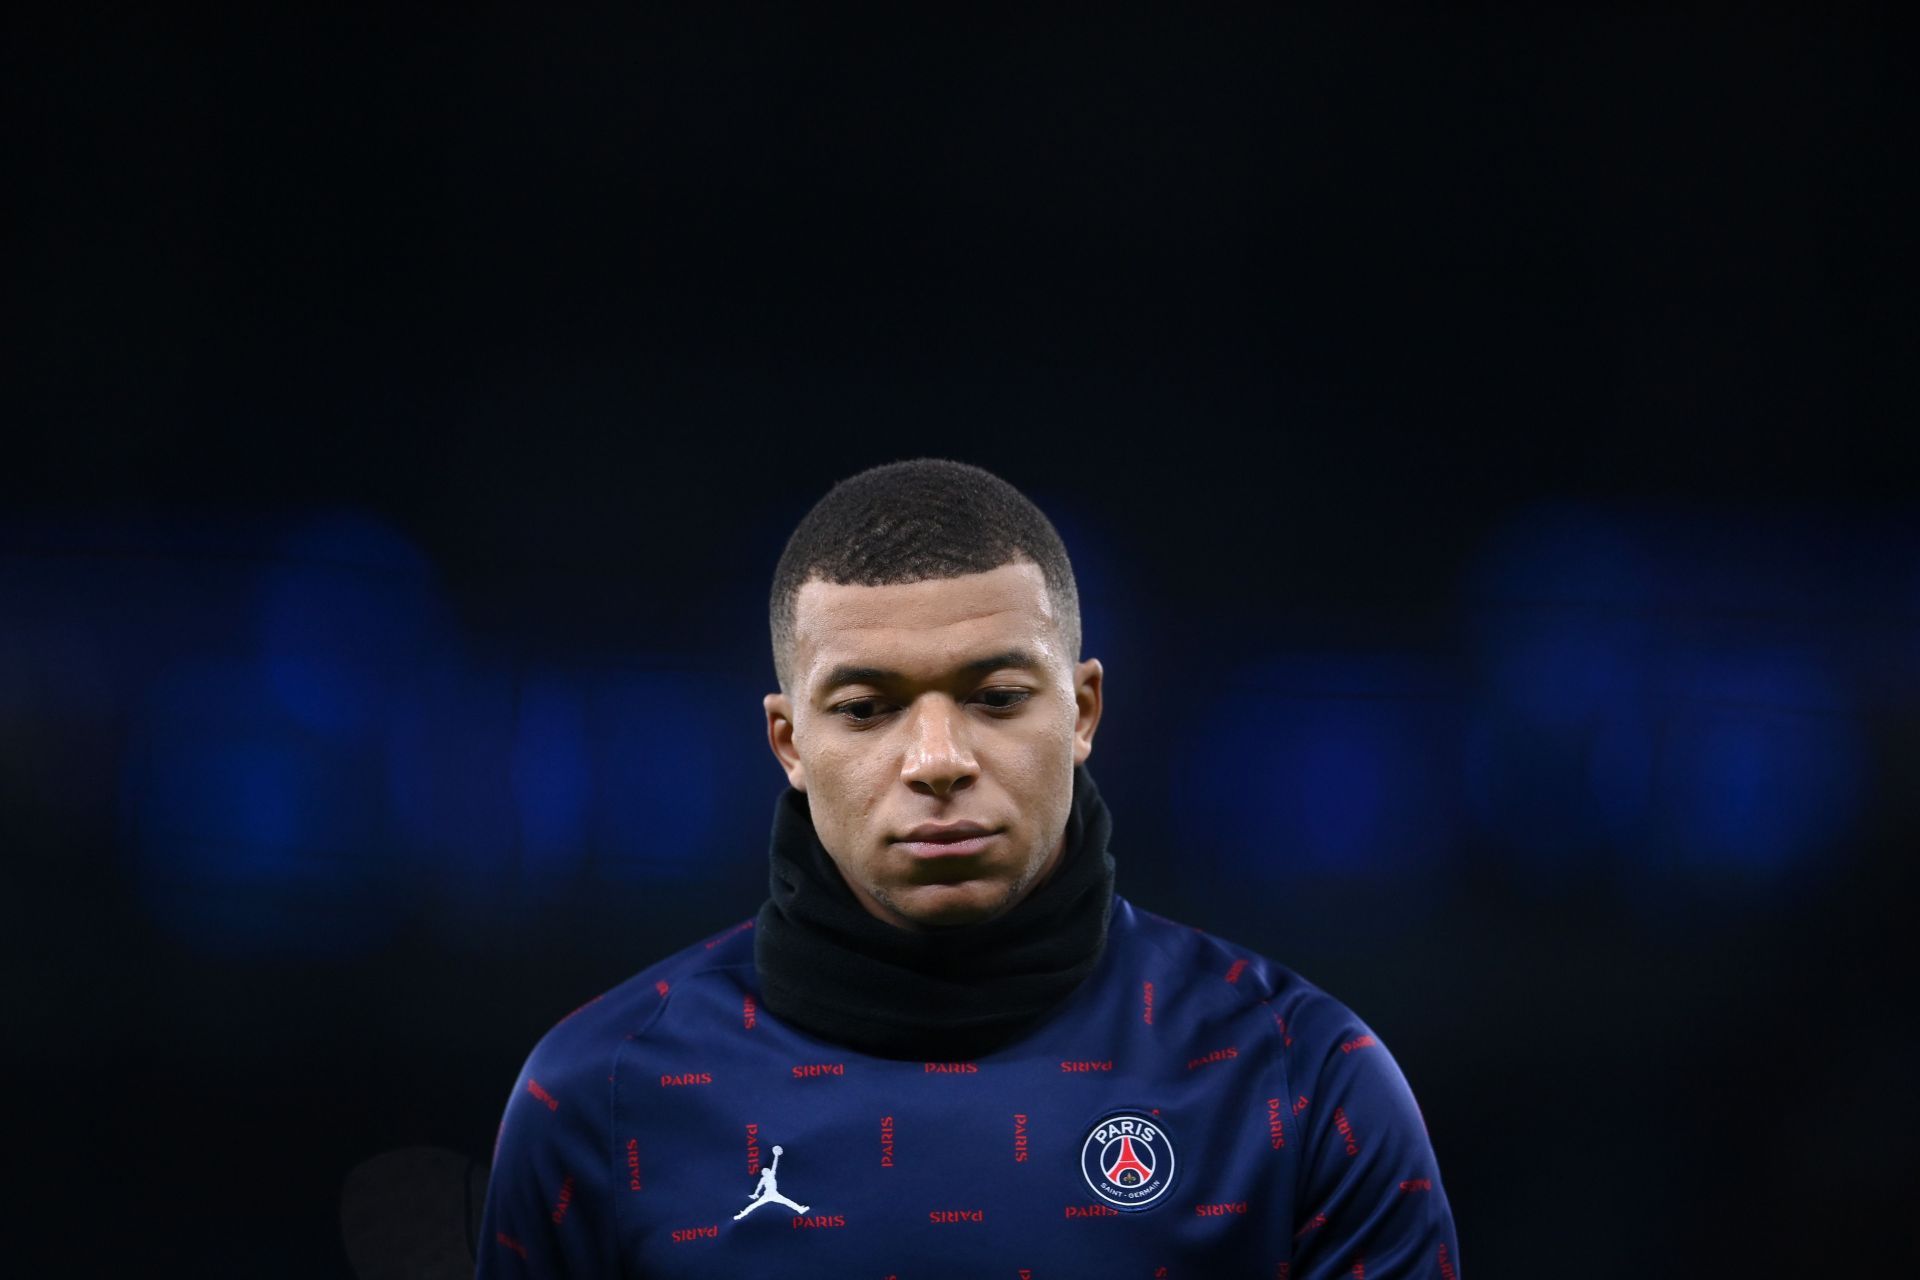 Kylian Mbappe has opened up about his relationship with PSG manager Mauricio Pochettino.